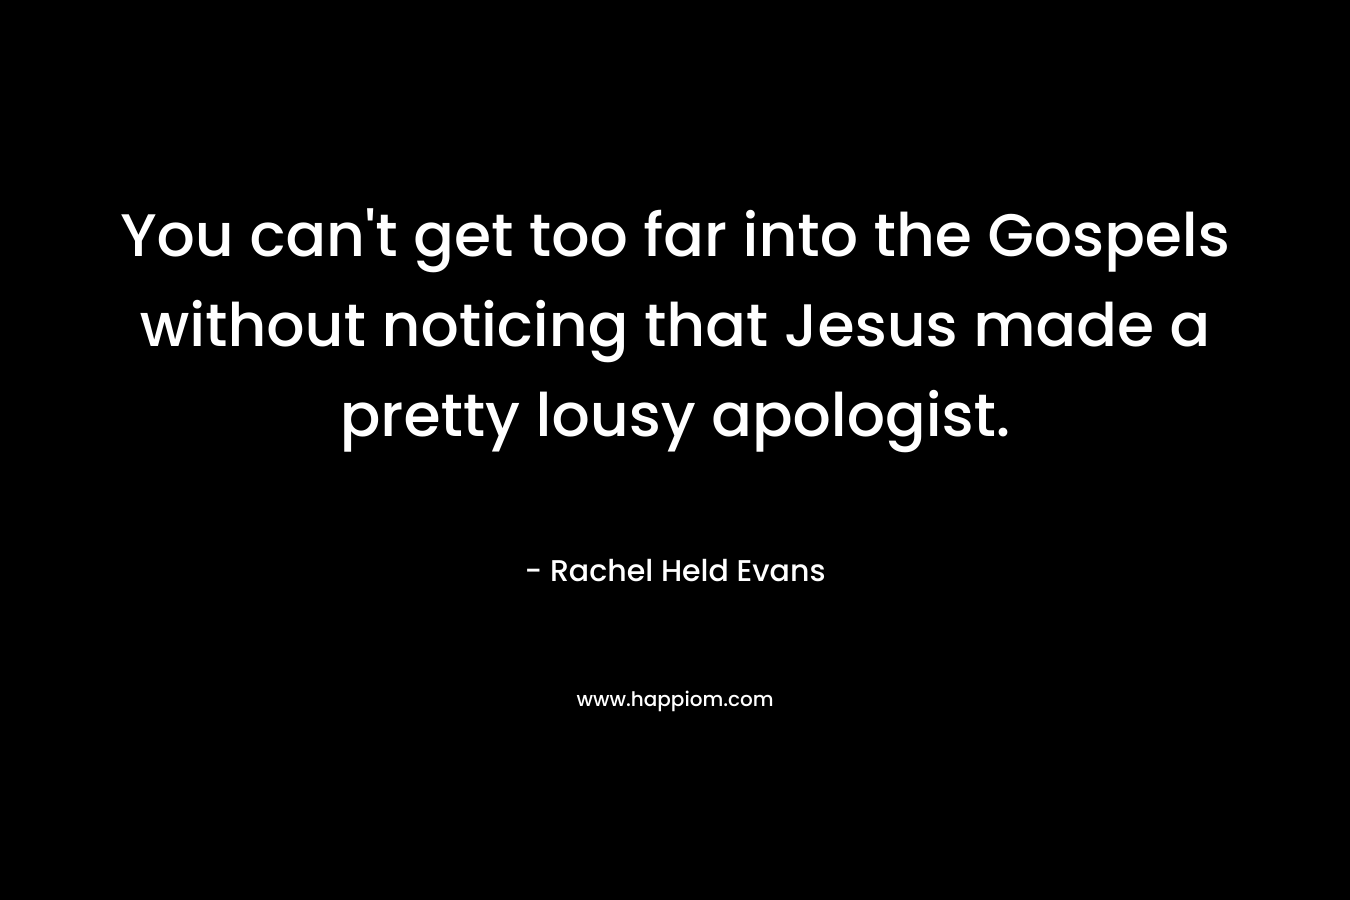 You can’t get too far into the Gospels without noticing that Jesus made a pretty lousy apologist. – Rachel Held Evans